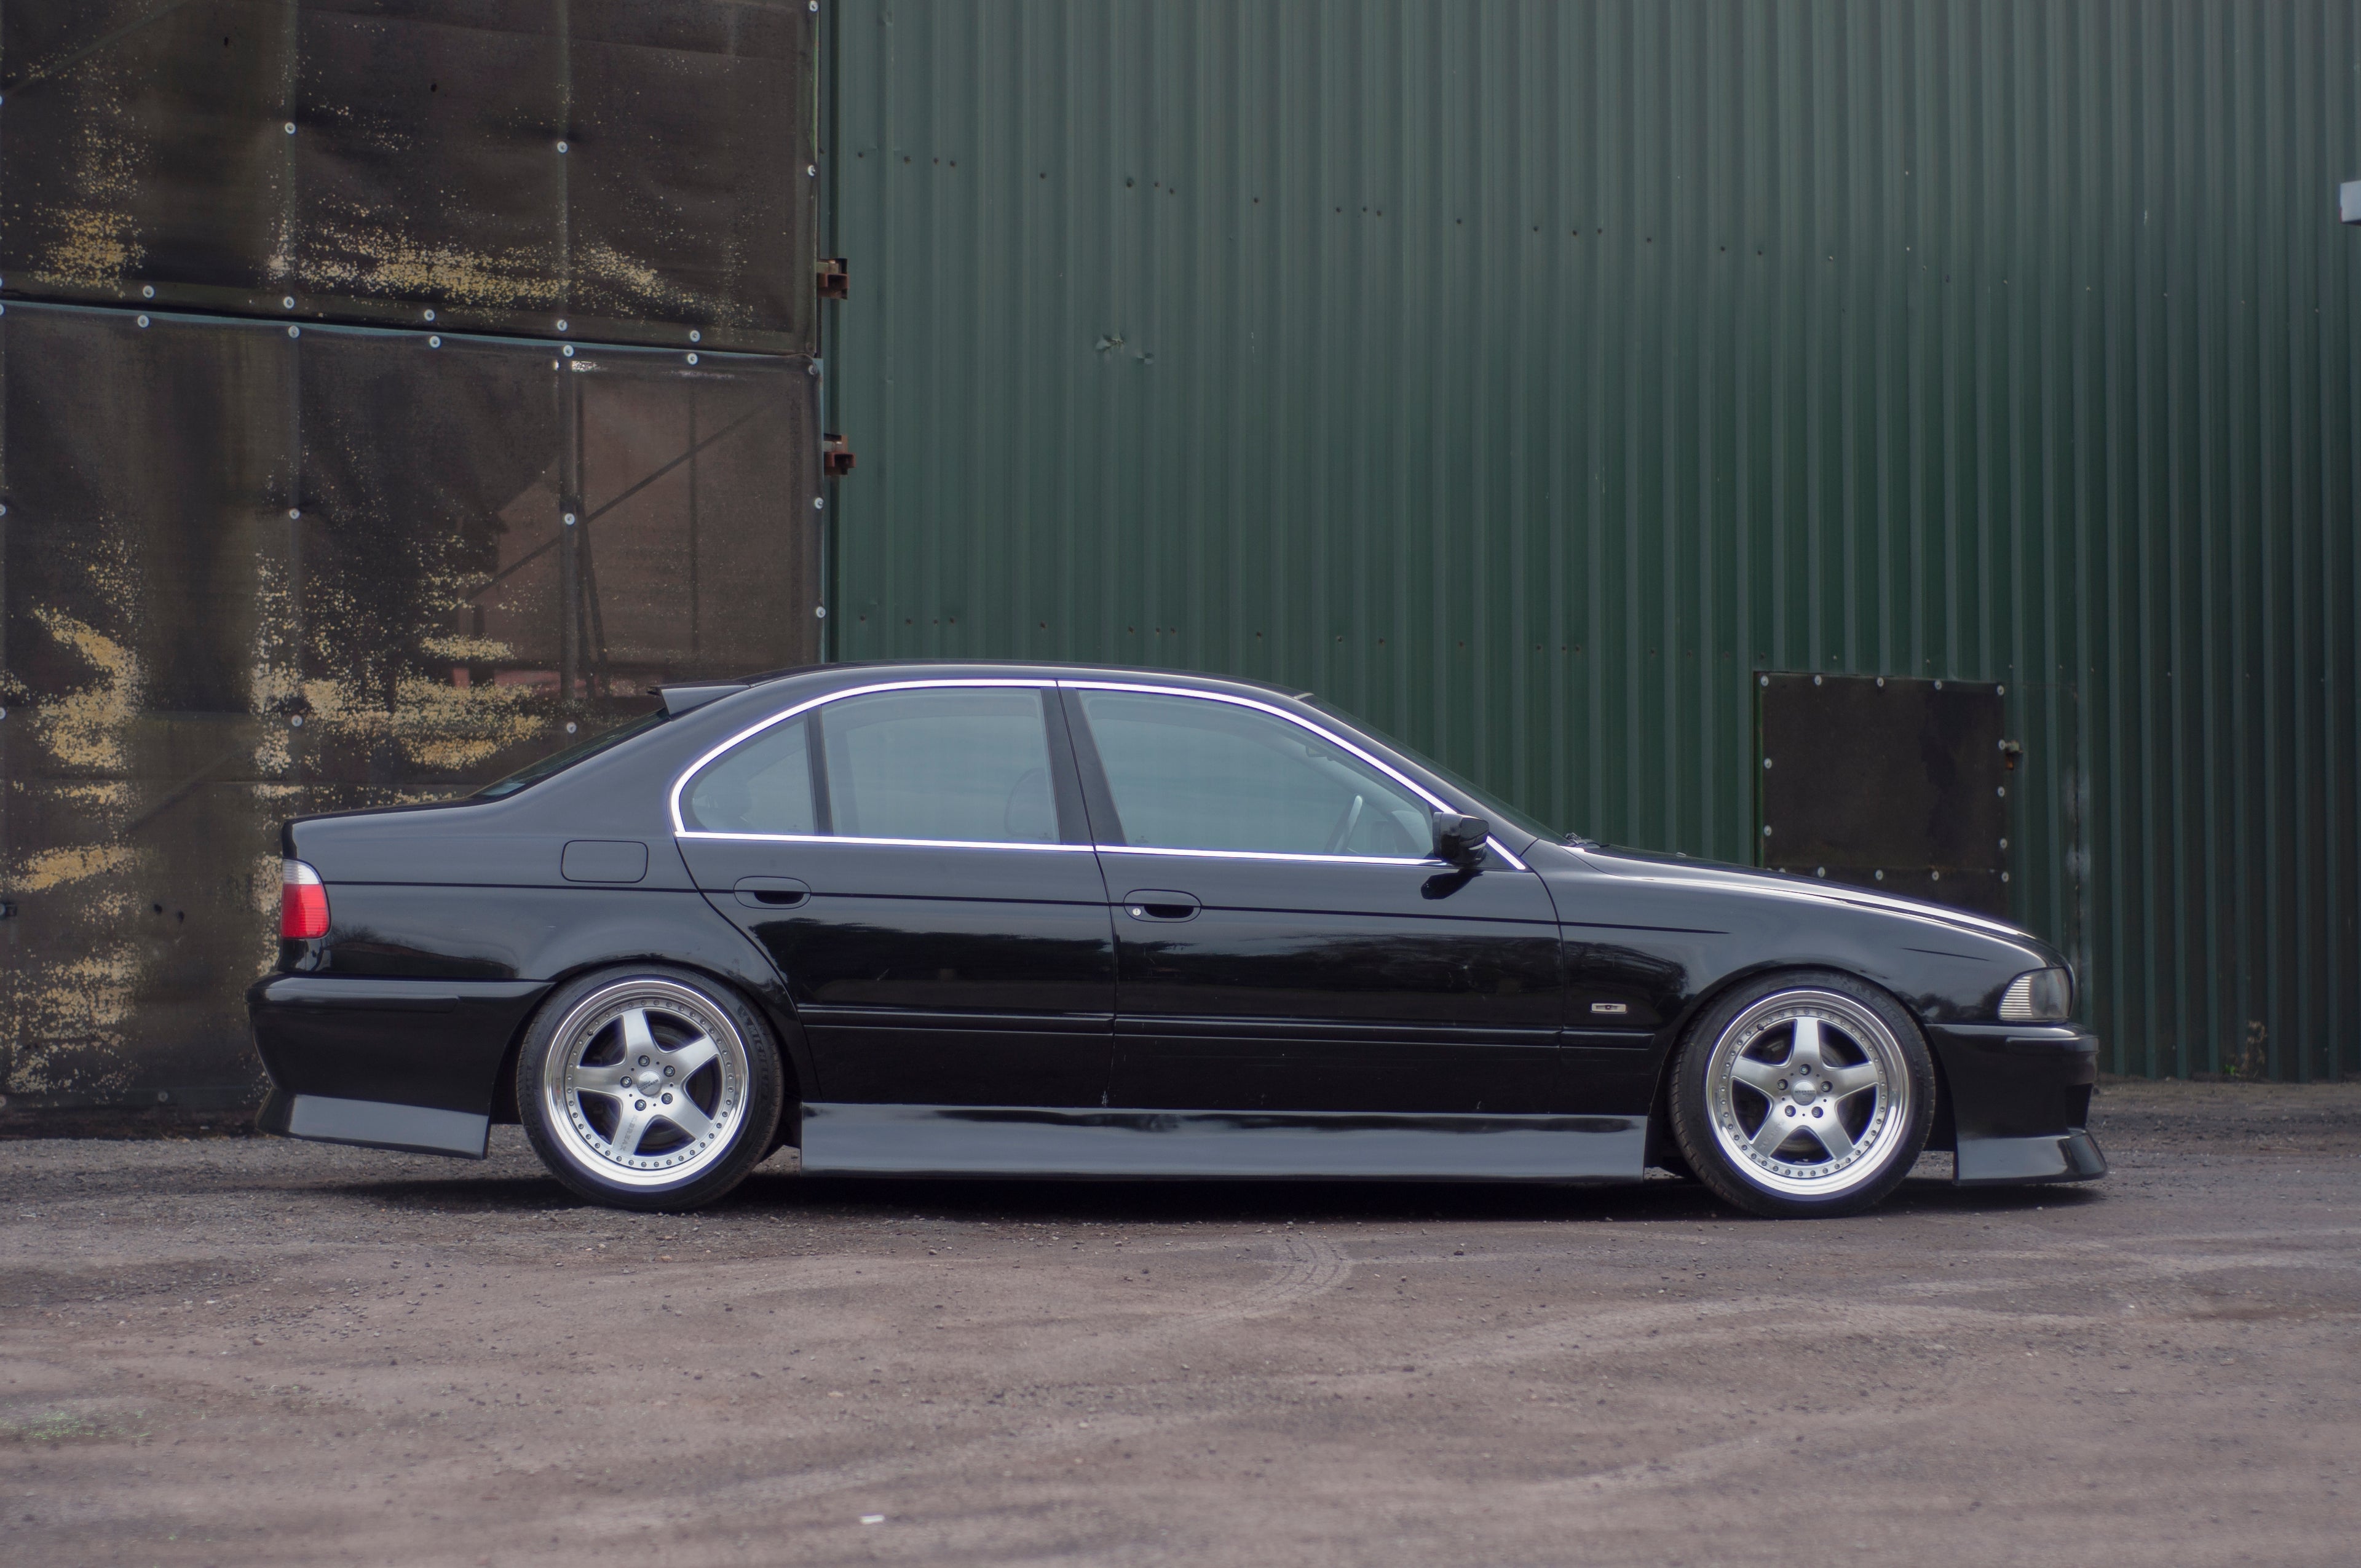 BMW E39 Side Skirts (Pair)